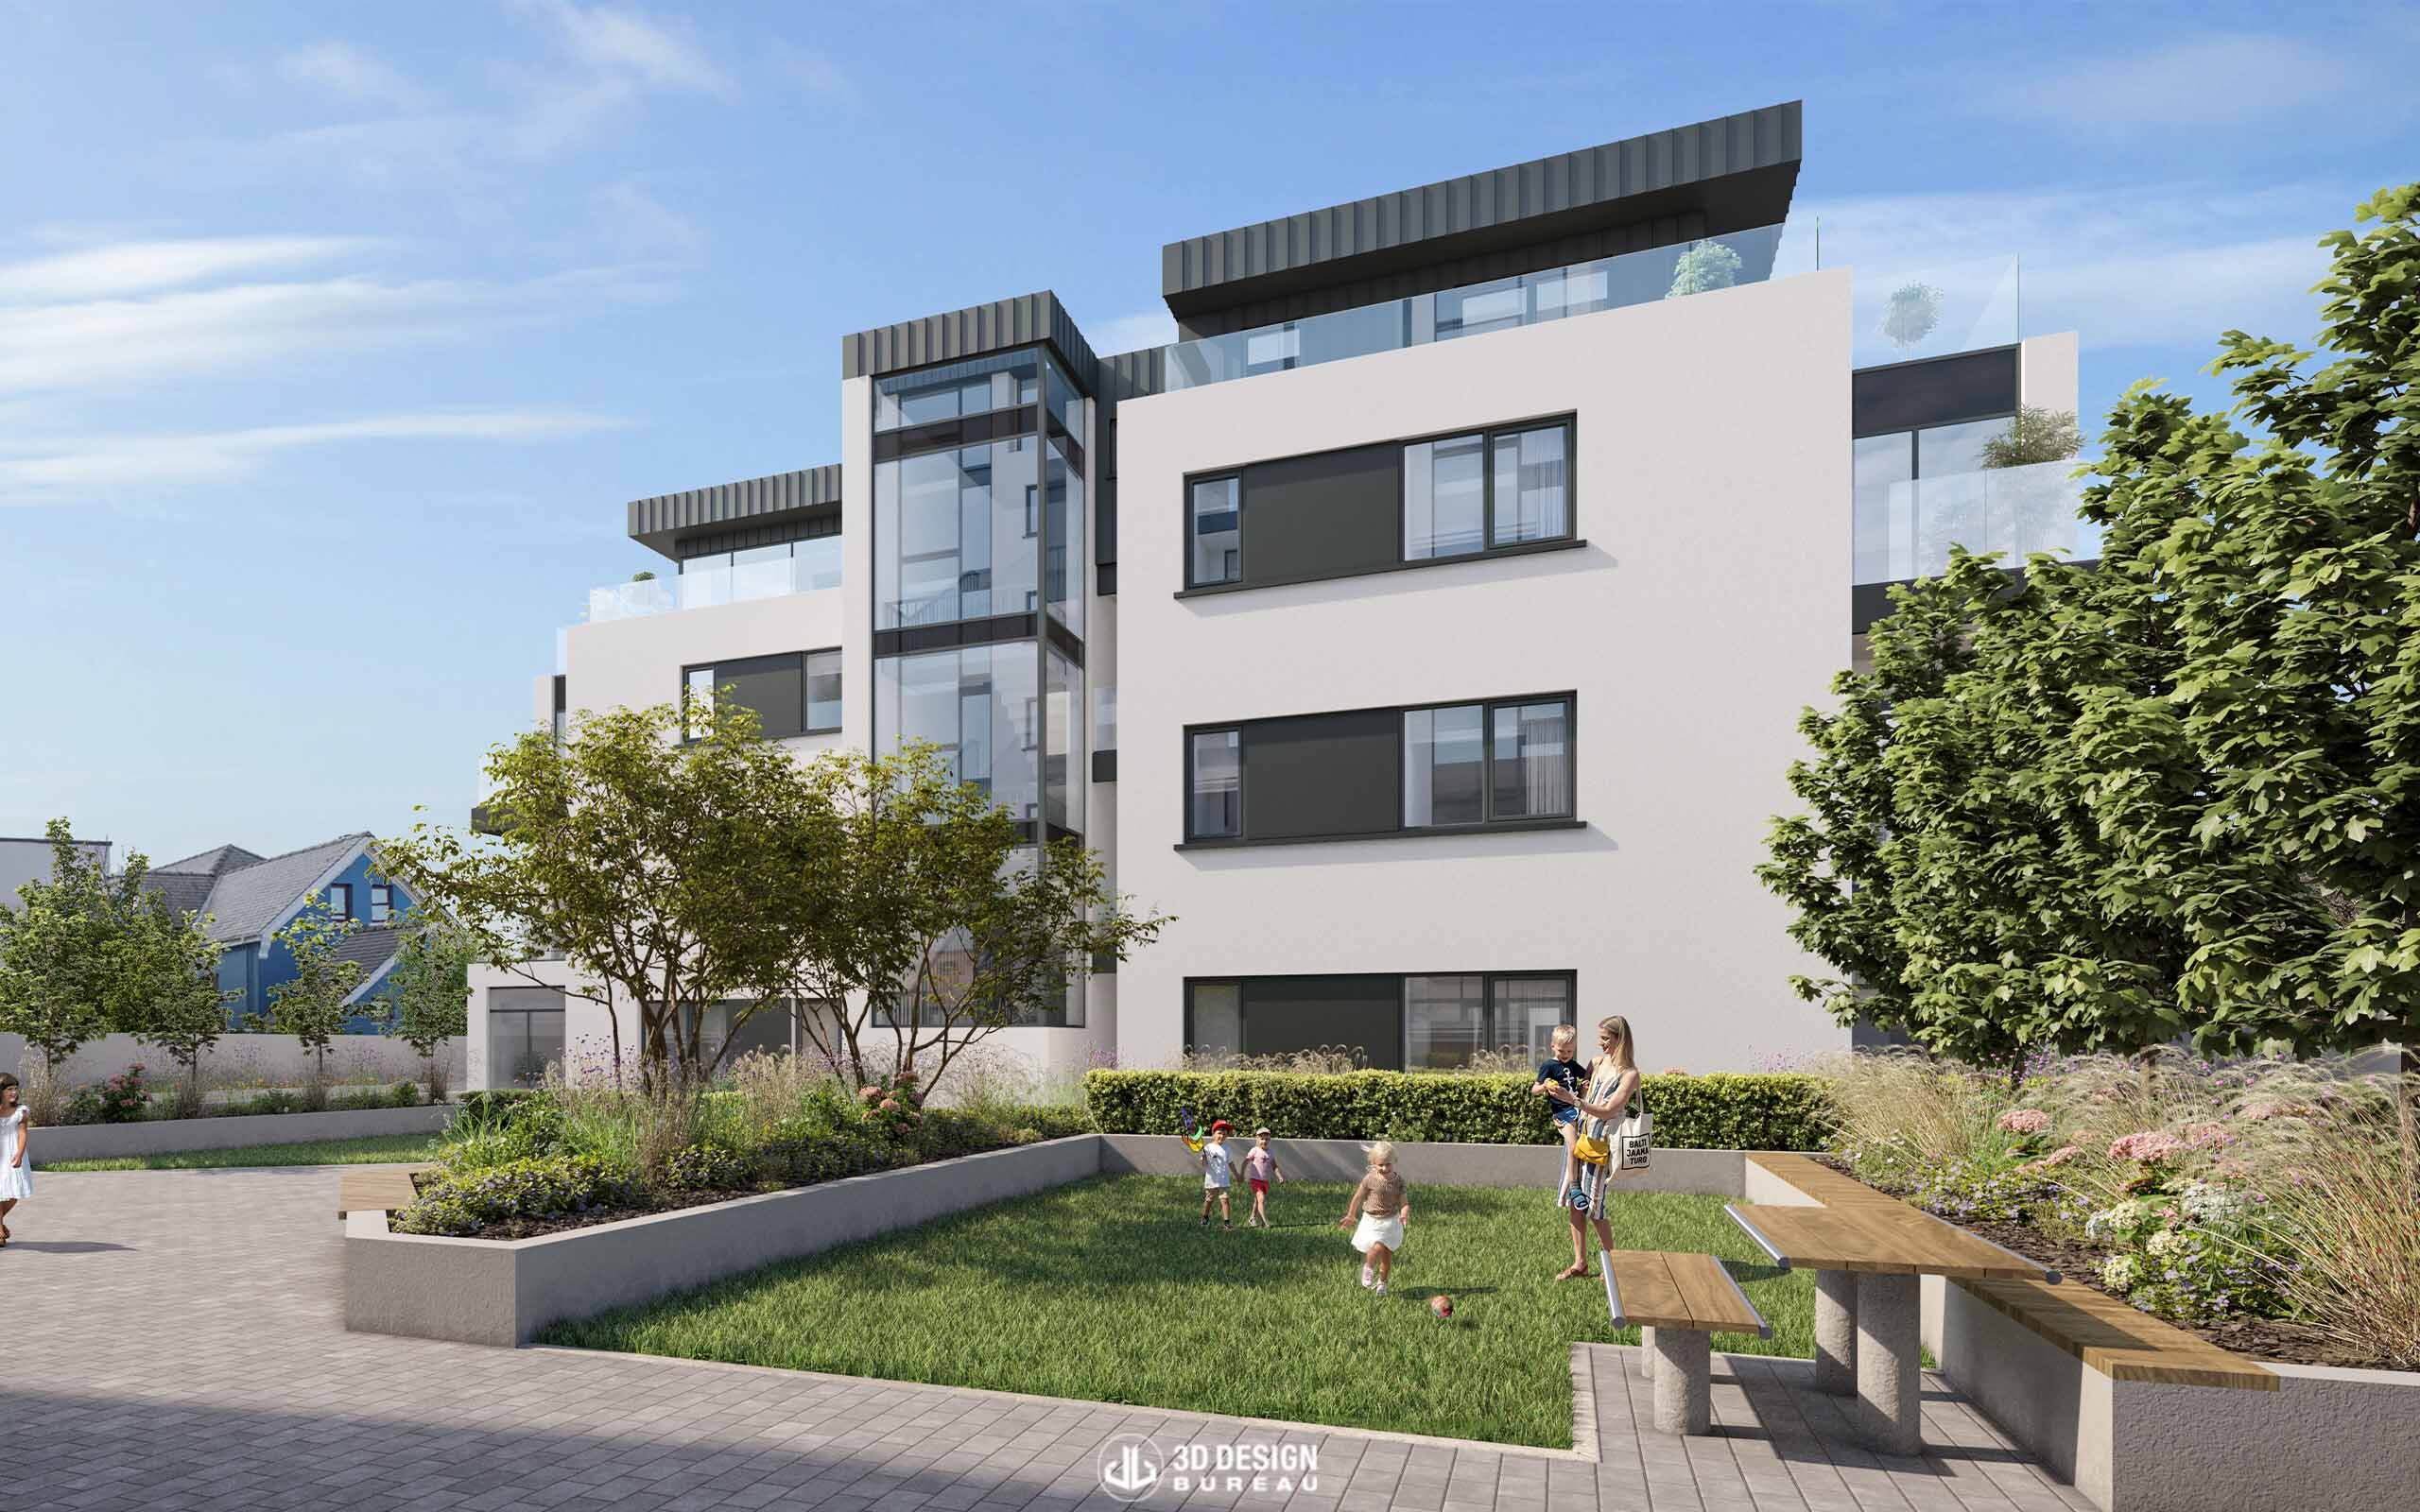 Architectural CGI of Salthill Residential Development, Galway.